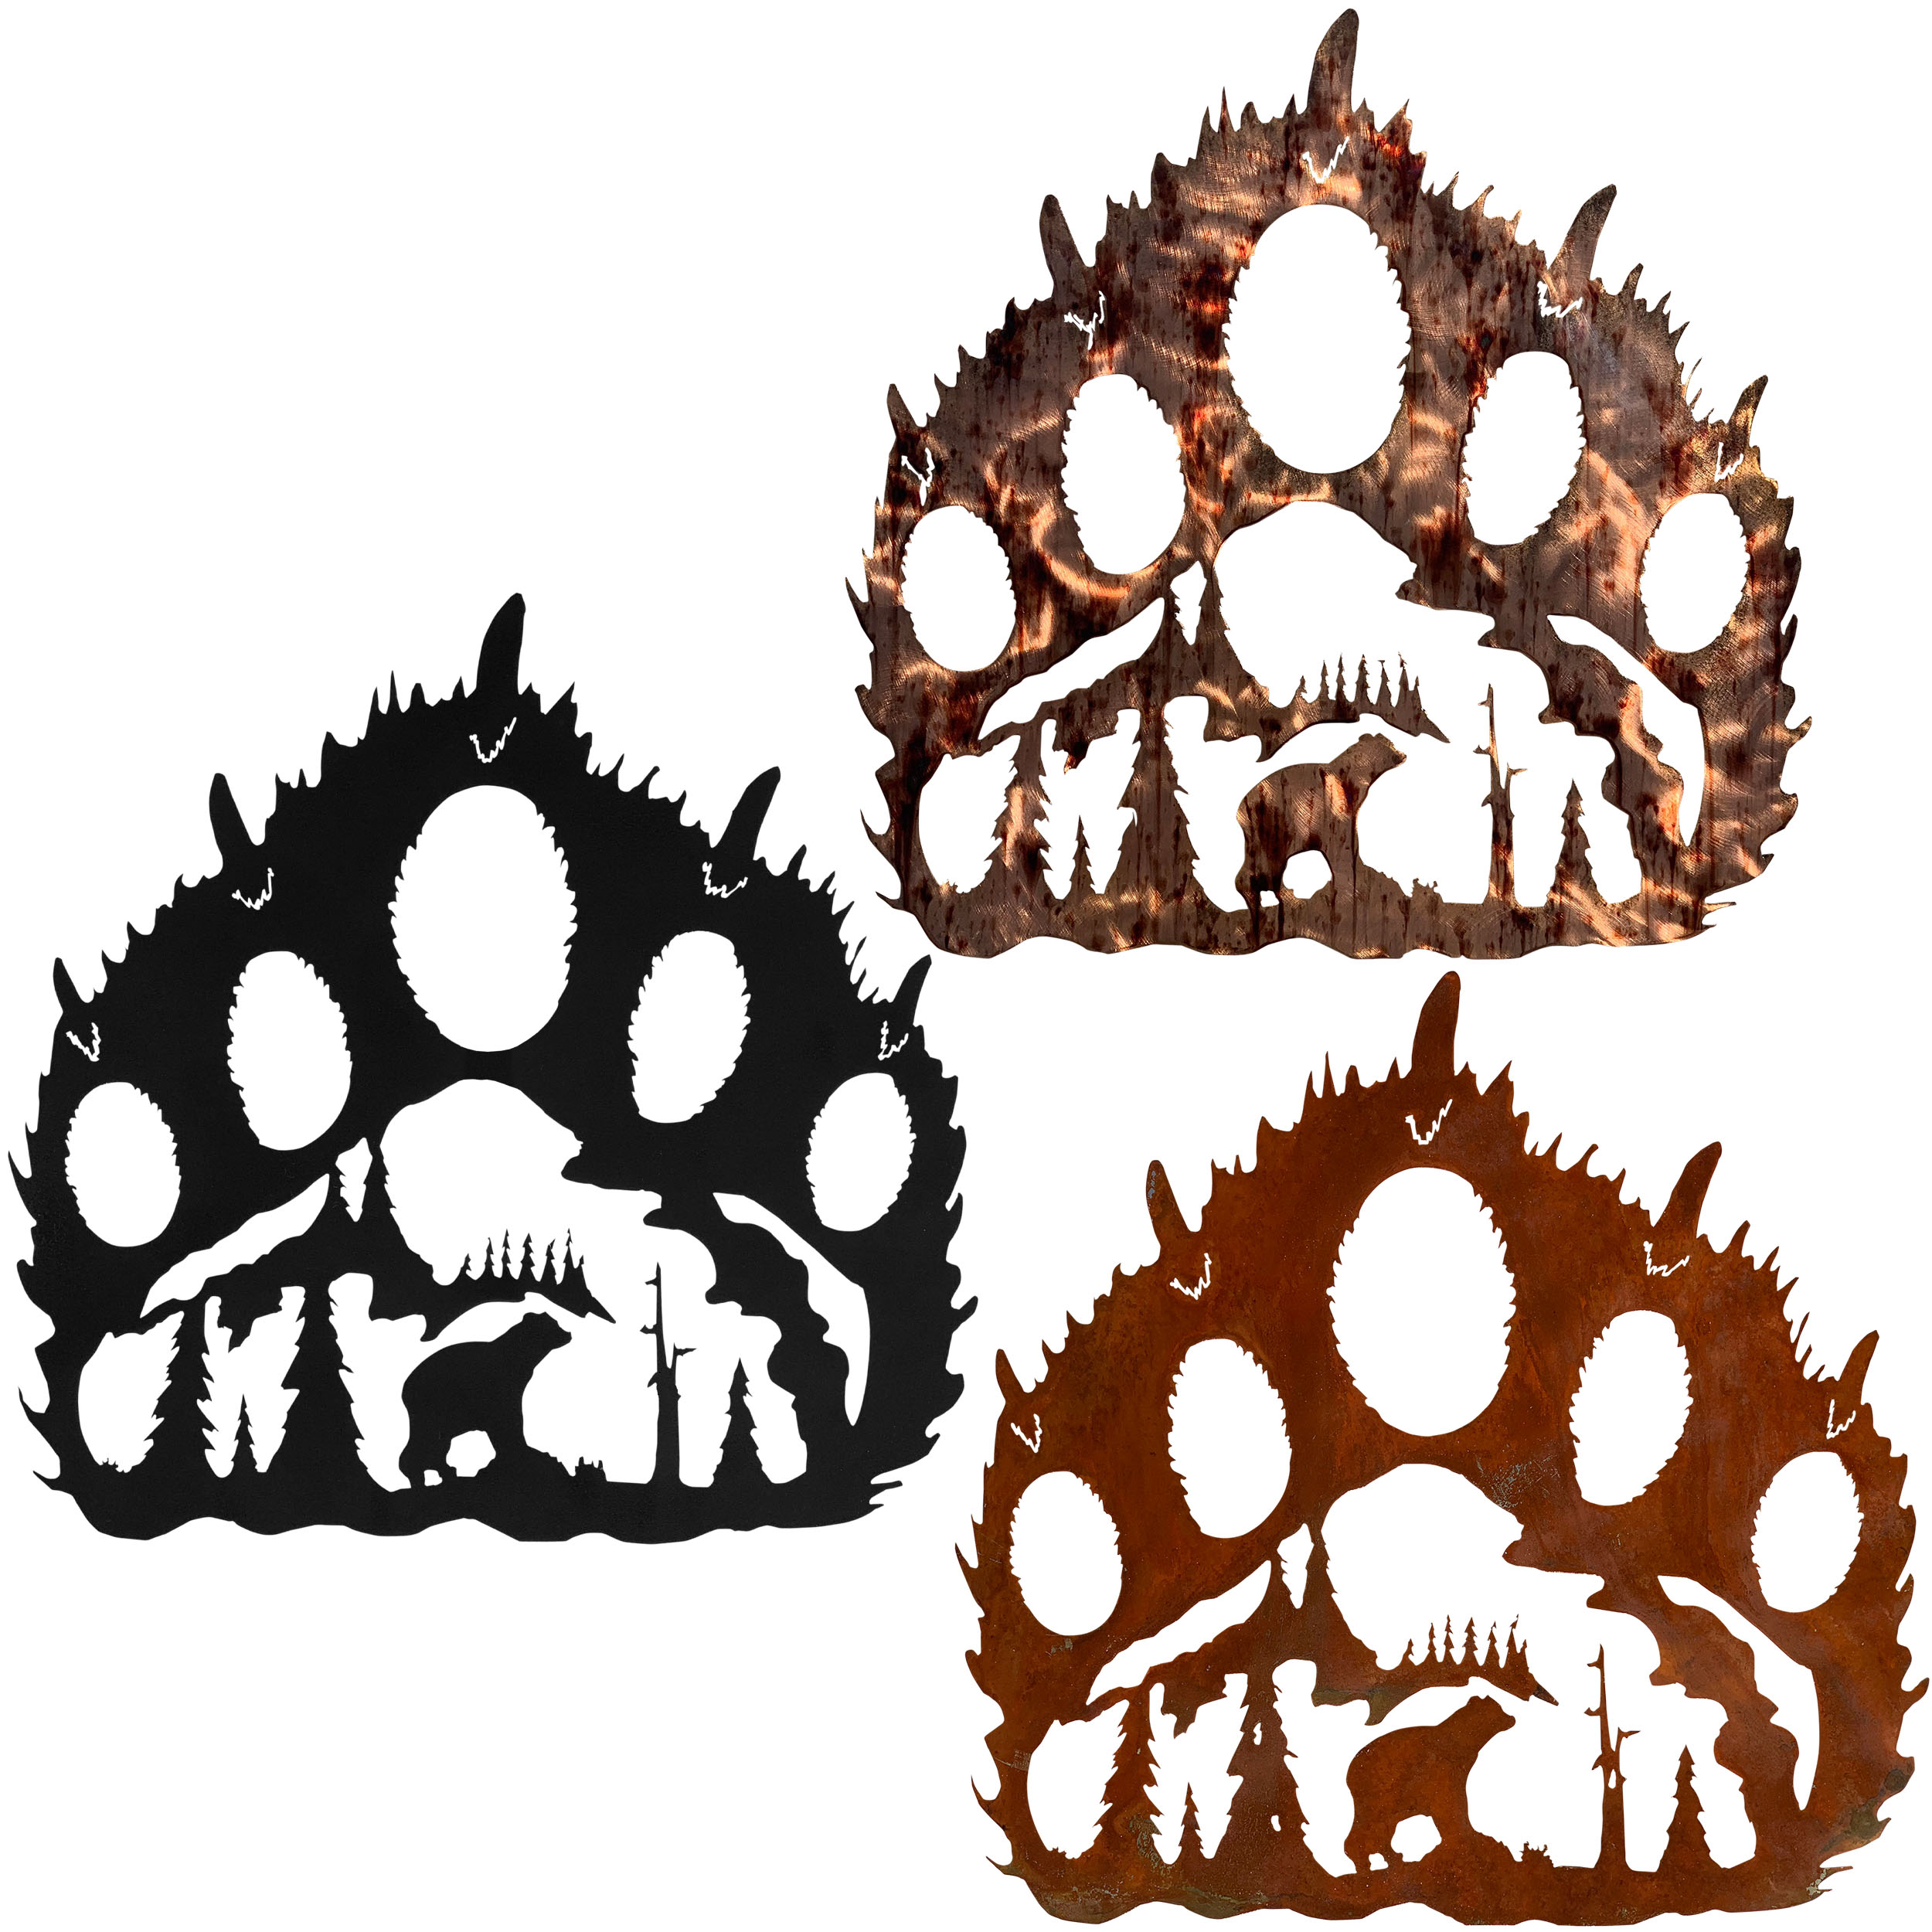 Bear Paw with Bear Scene by Dugout Creek Designs